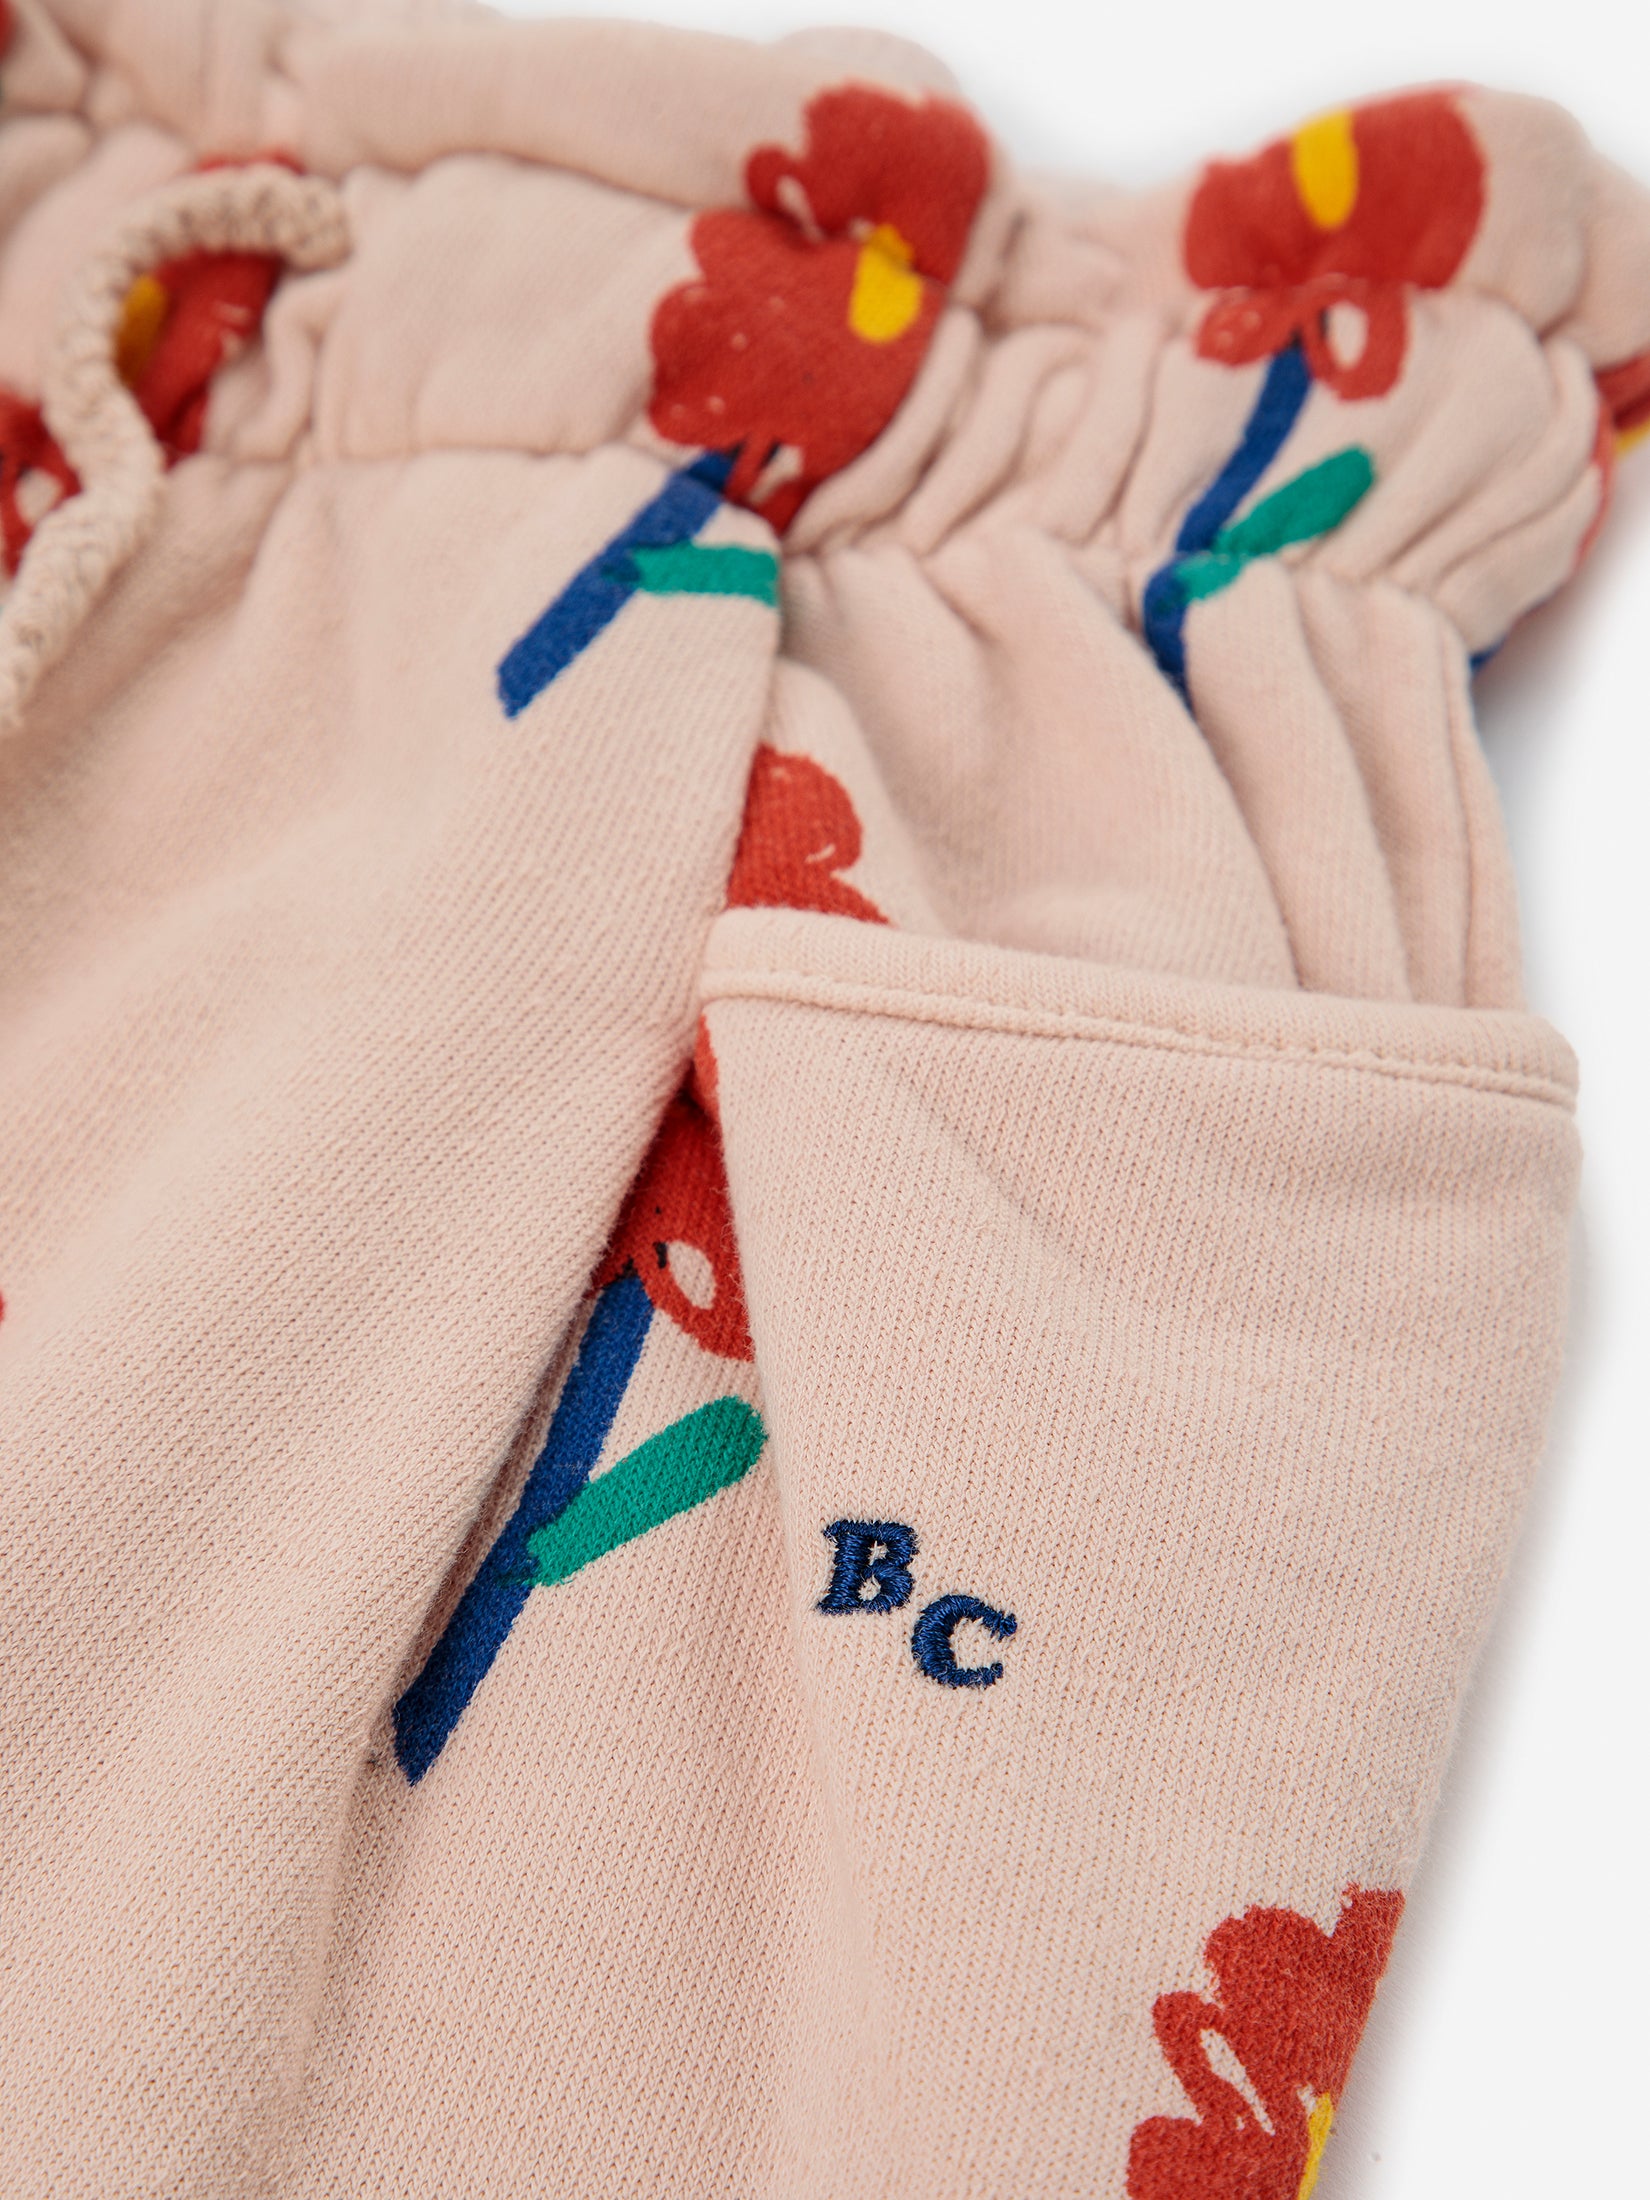 Bobo Choses Kids Jogging Pants - Flowers all Over